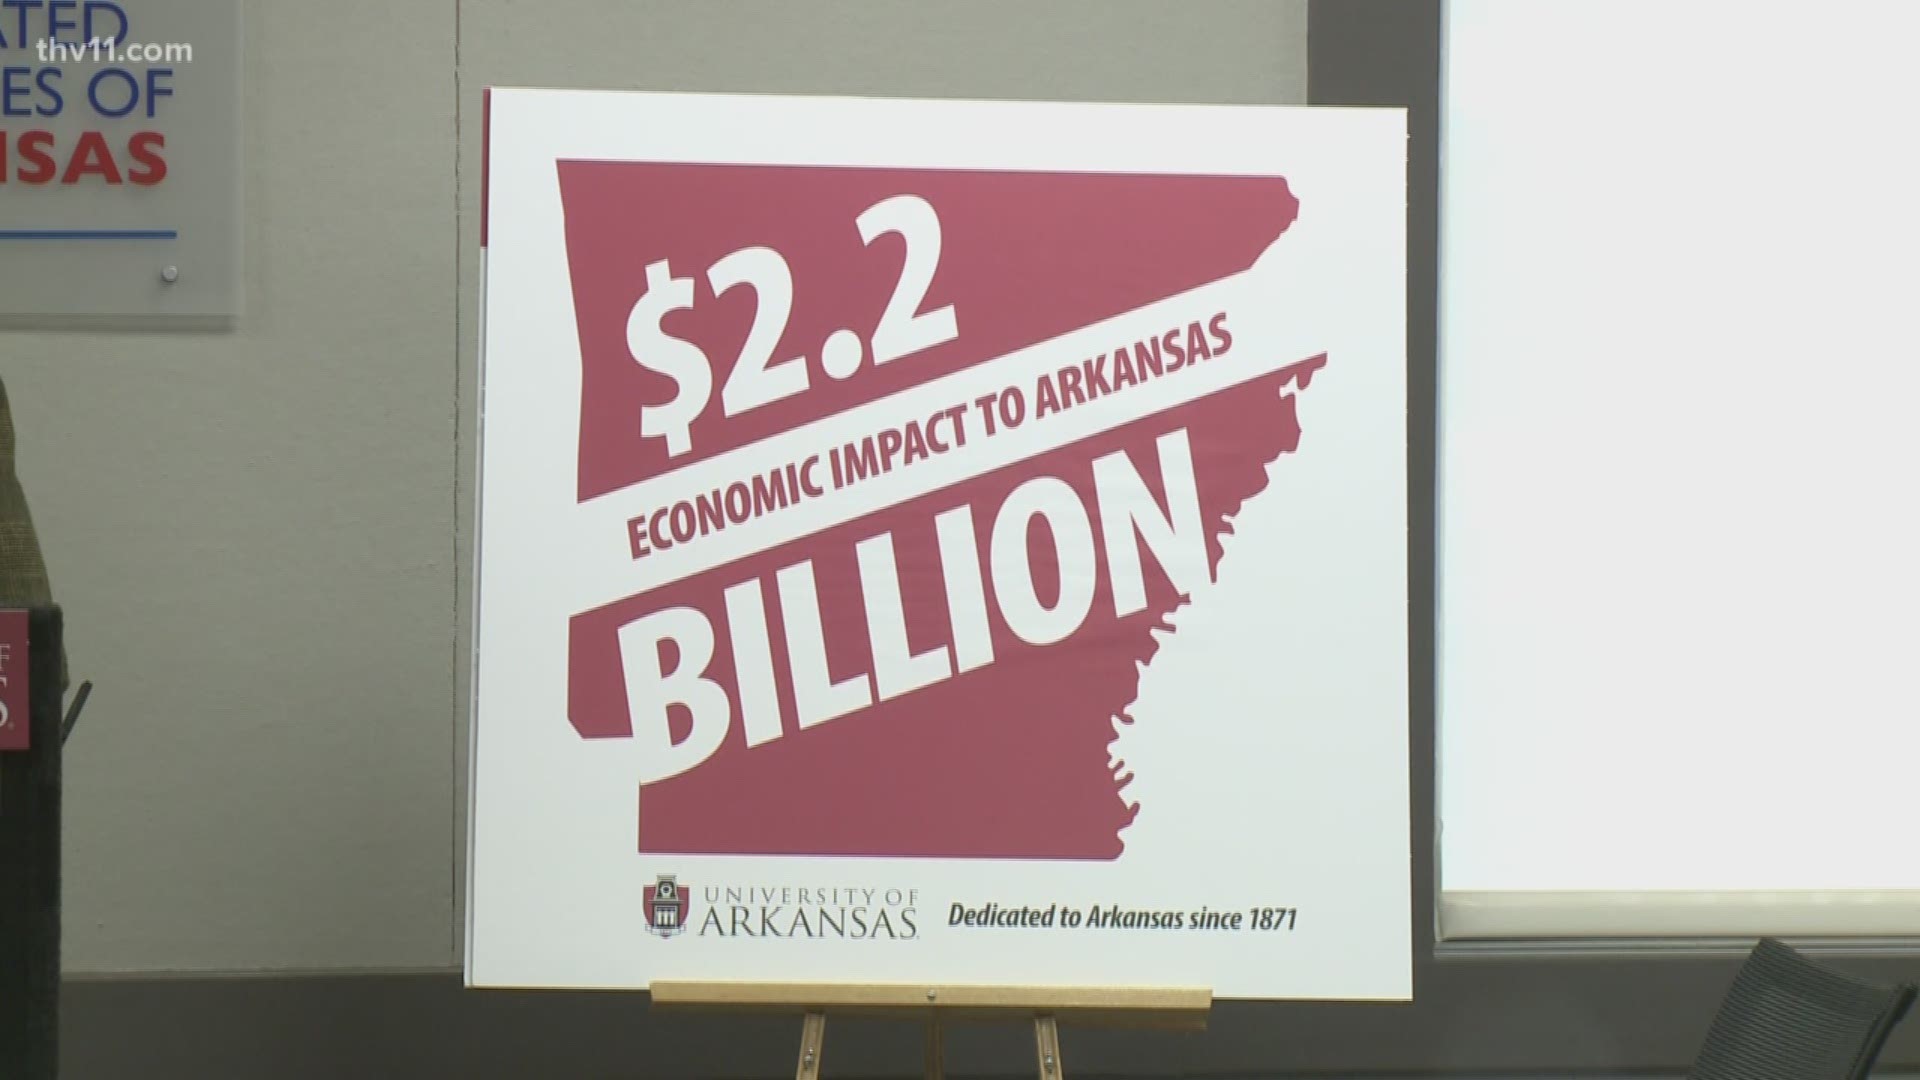 Last year alone, the university added $2.2 billion to our state's economy.